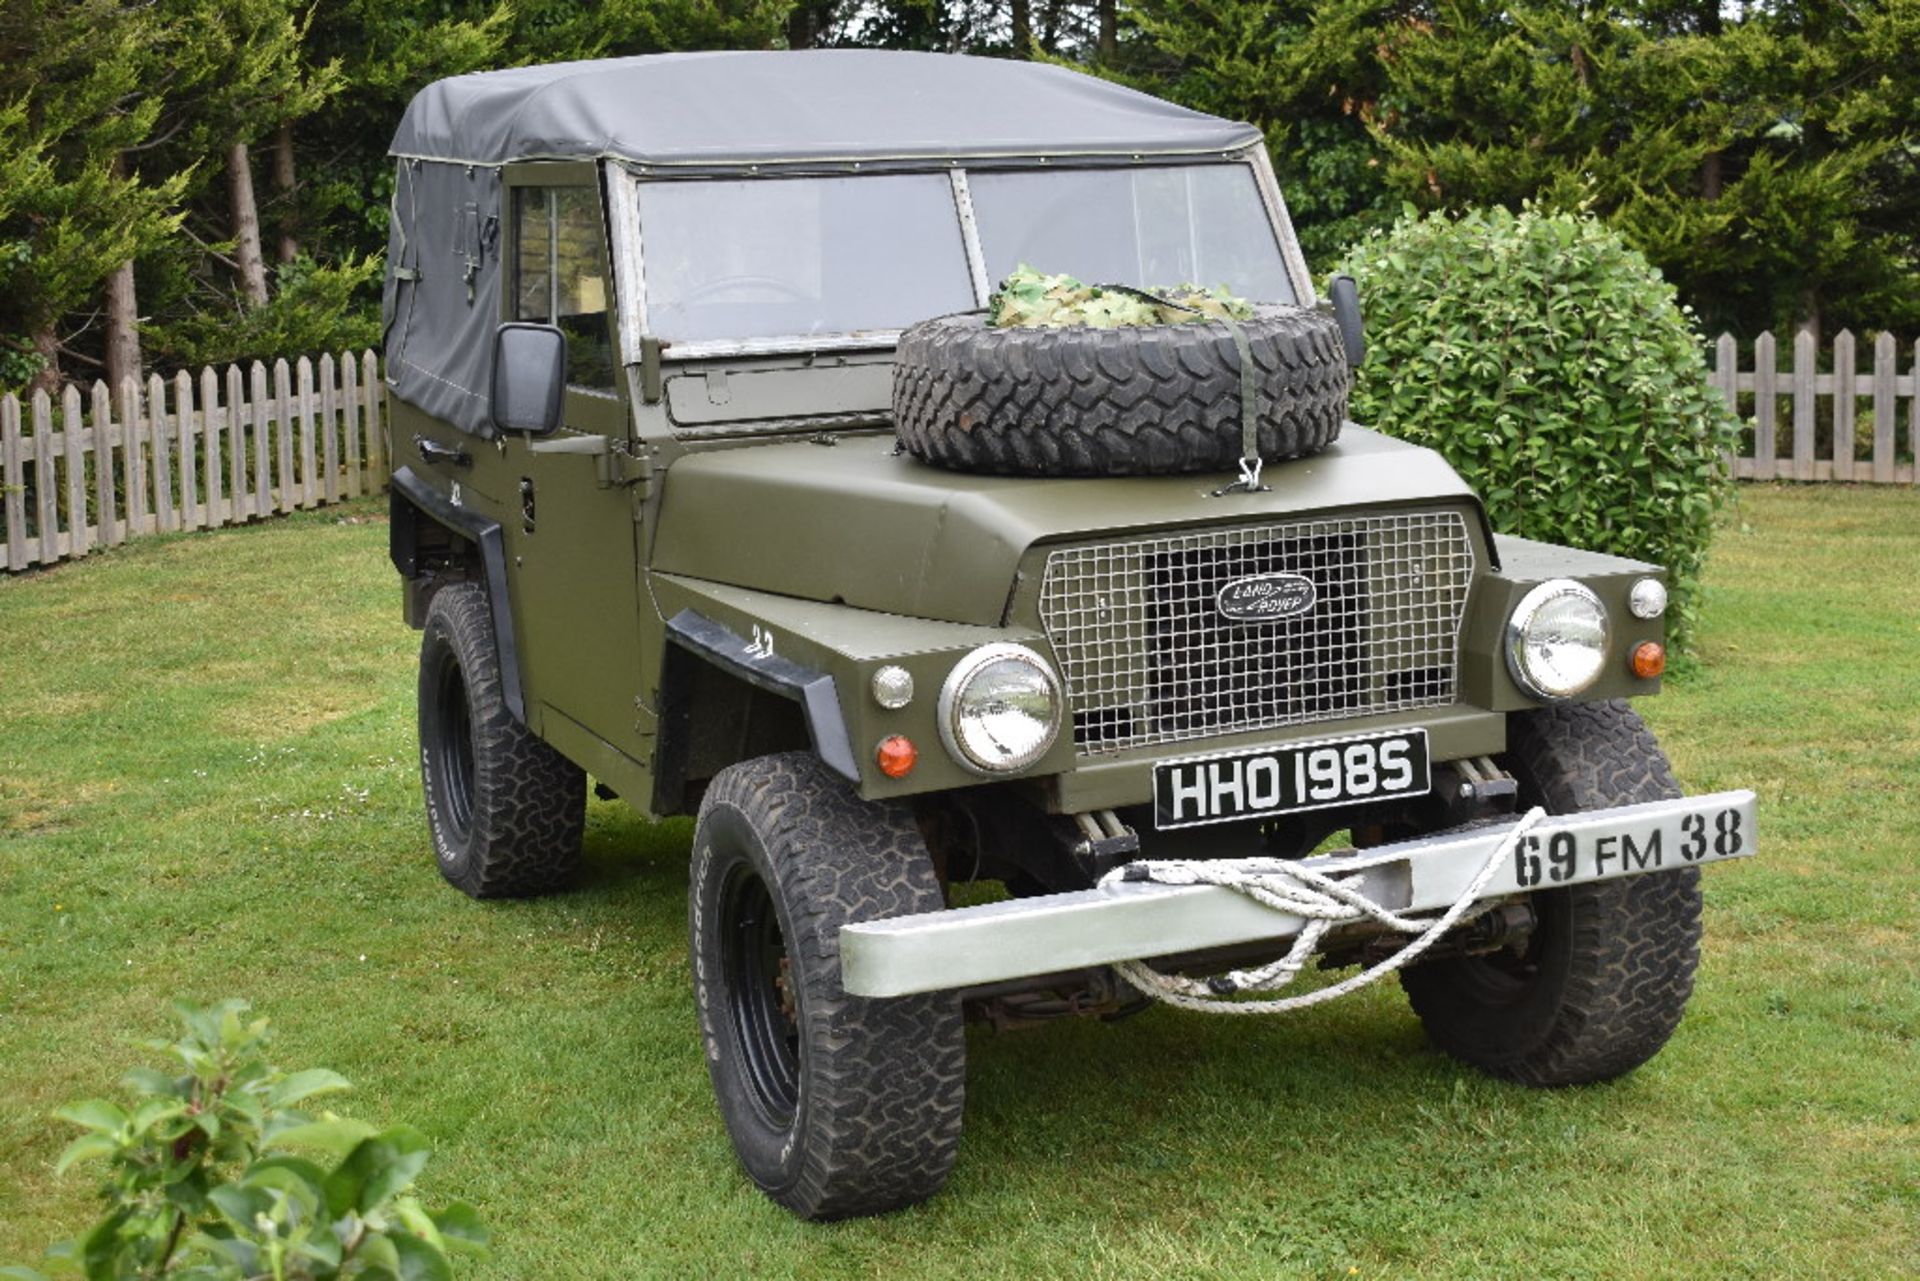 A 1974 Land Rover Series III military lightweight 1/2 ton utility truck, registration number HHO - Image 2 of 6